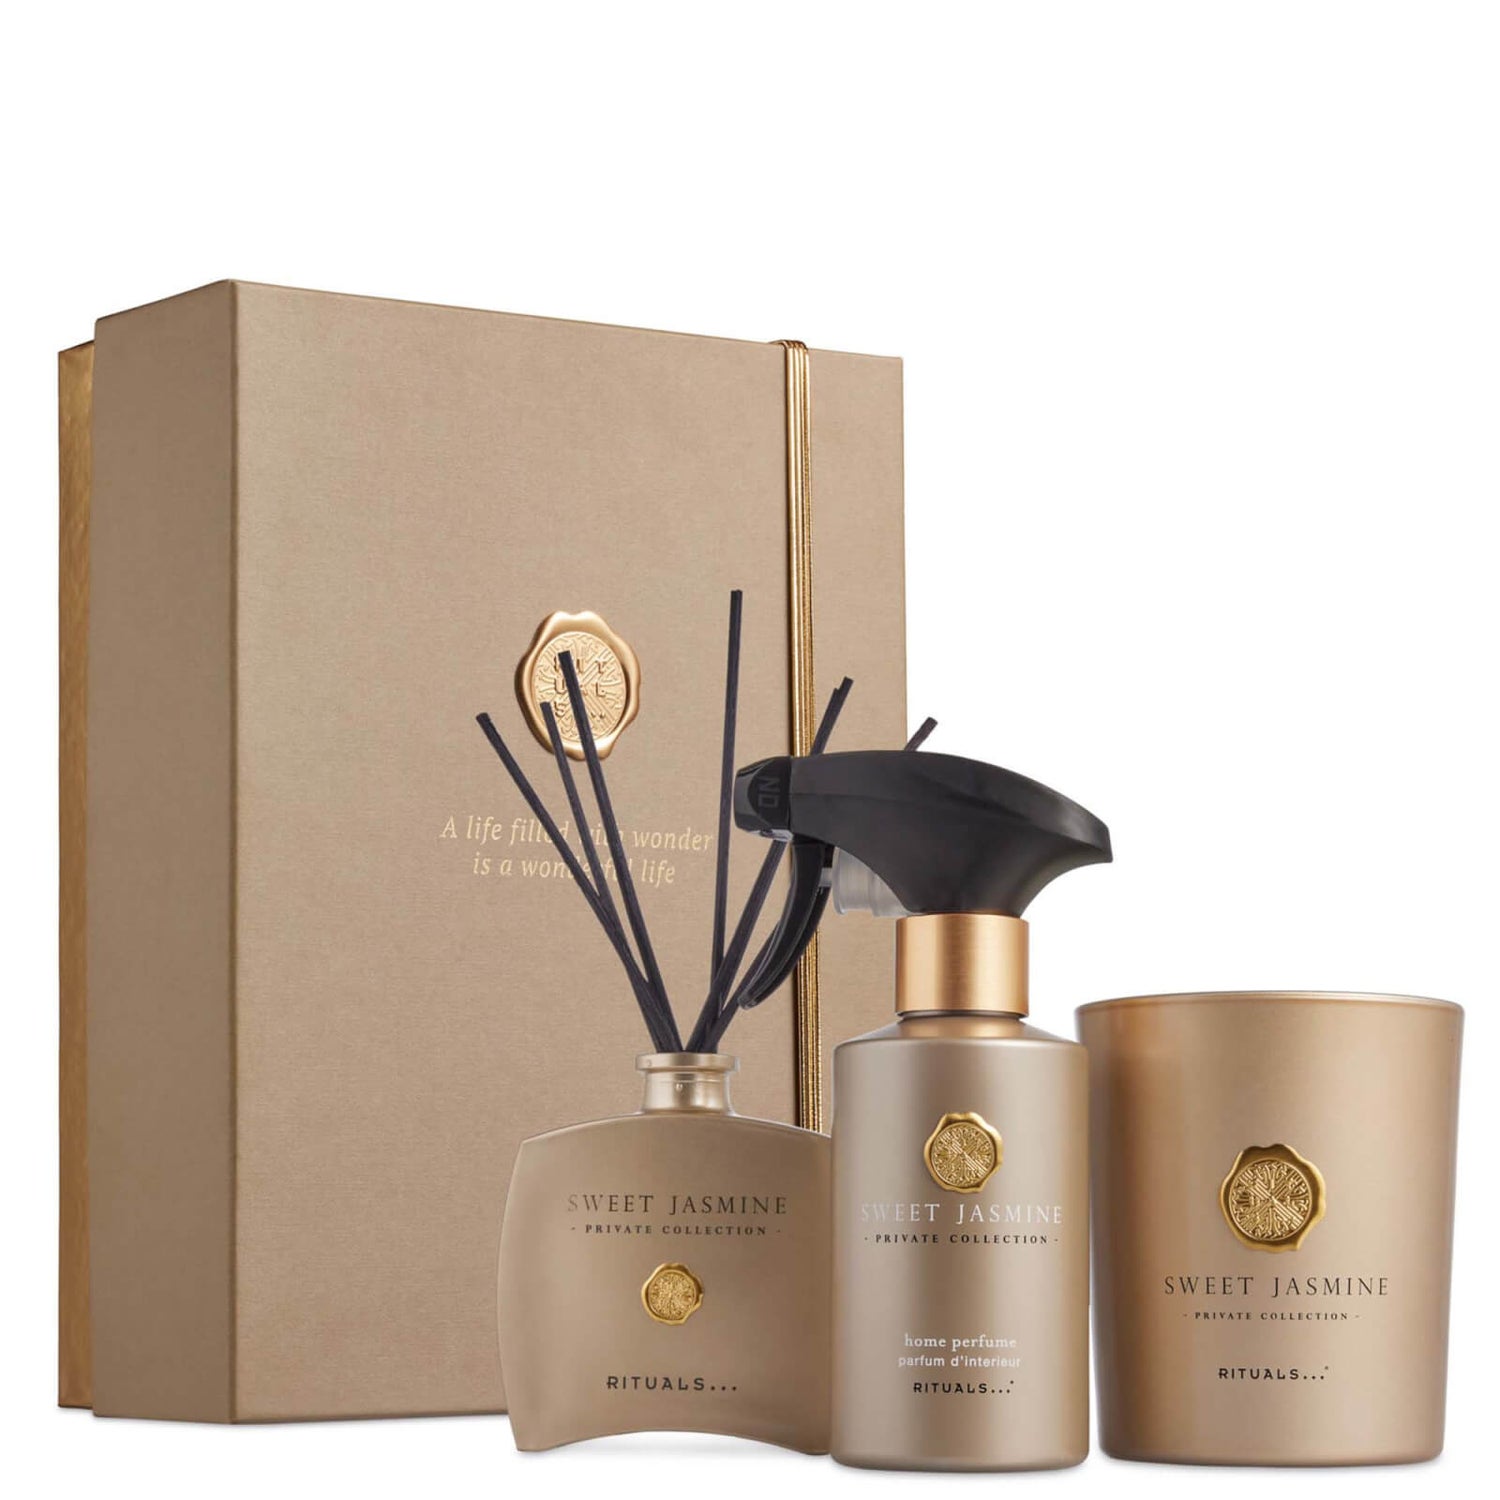 Rituals Private Collection Gift Set - Sweet Jasmine (Worth £87.30